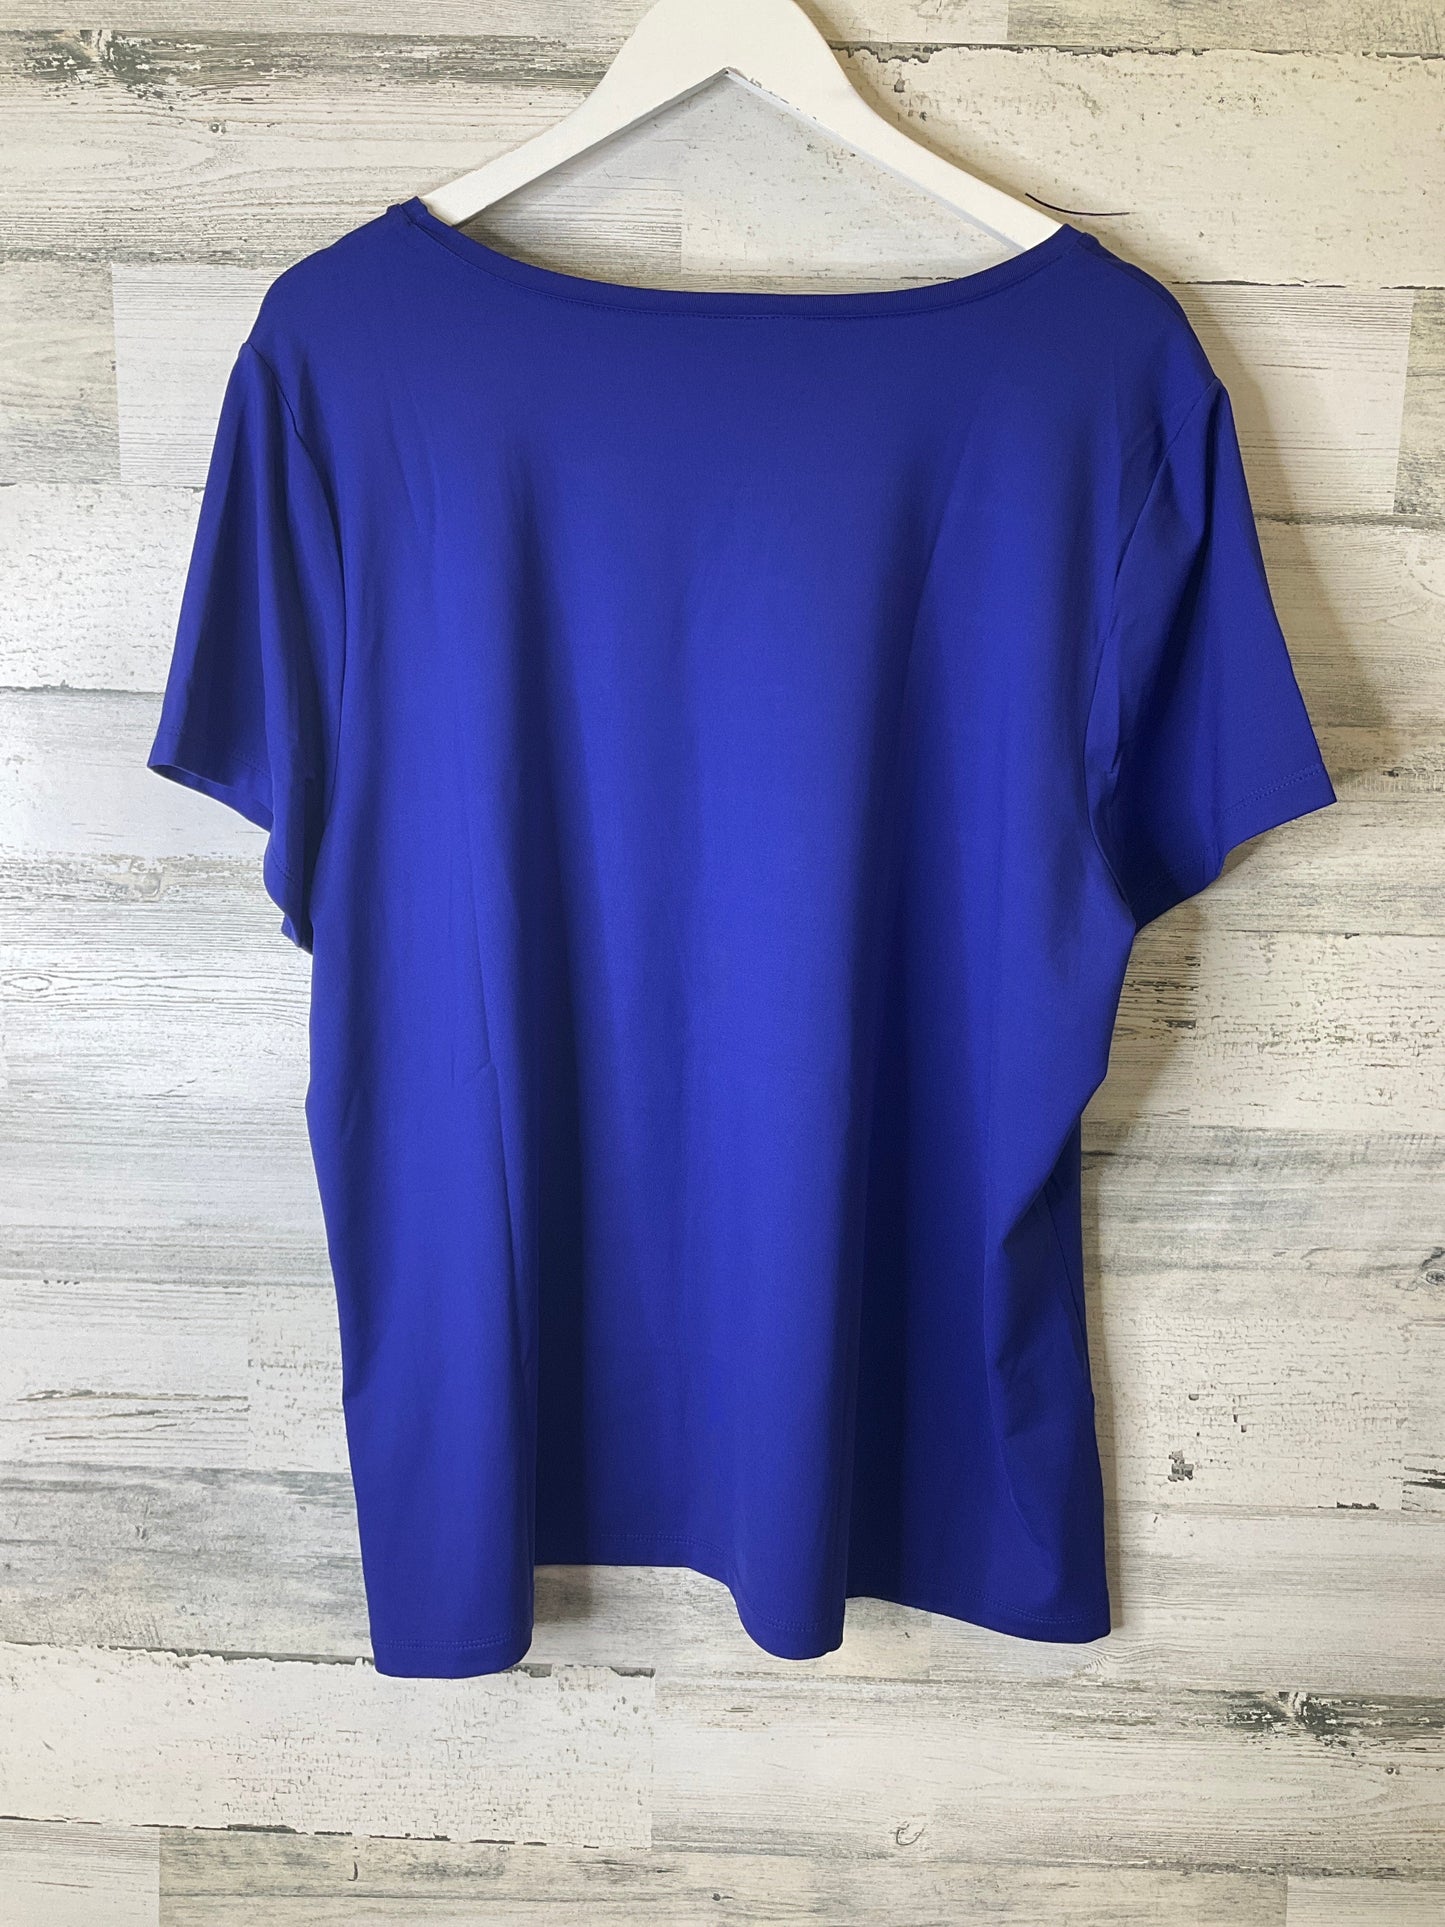 Blue Top Short Sleeve East 5th, Size 2x